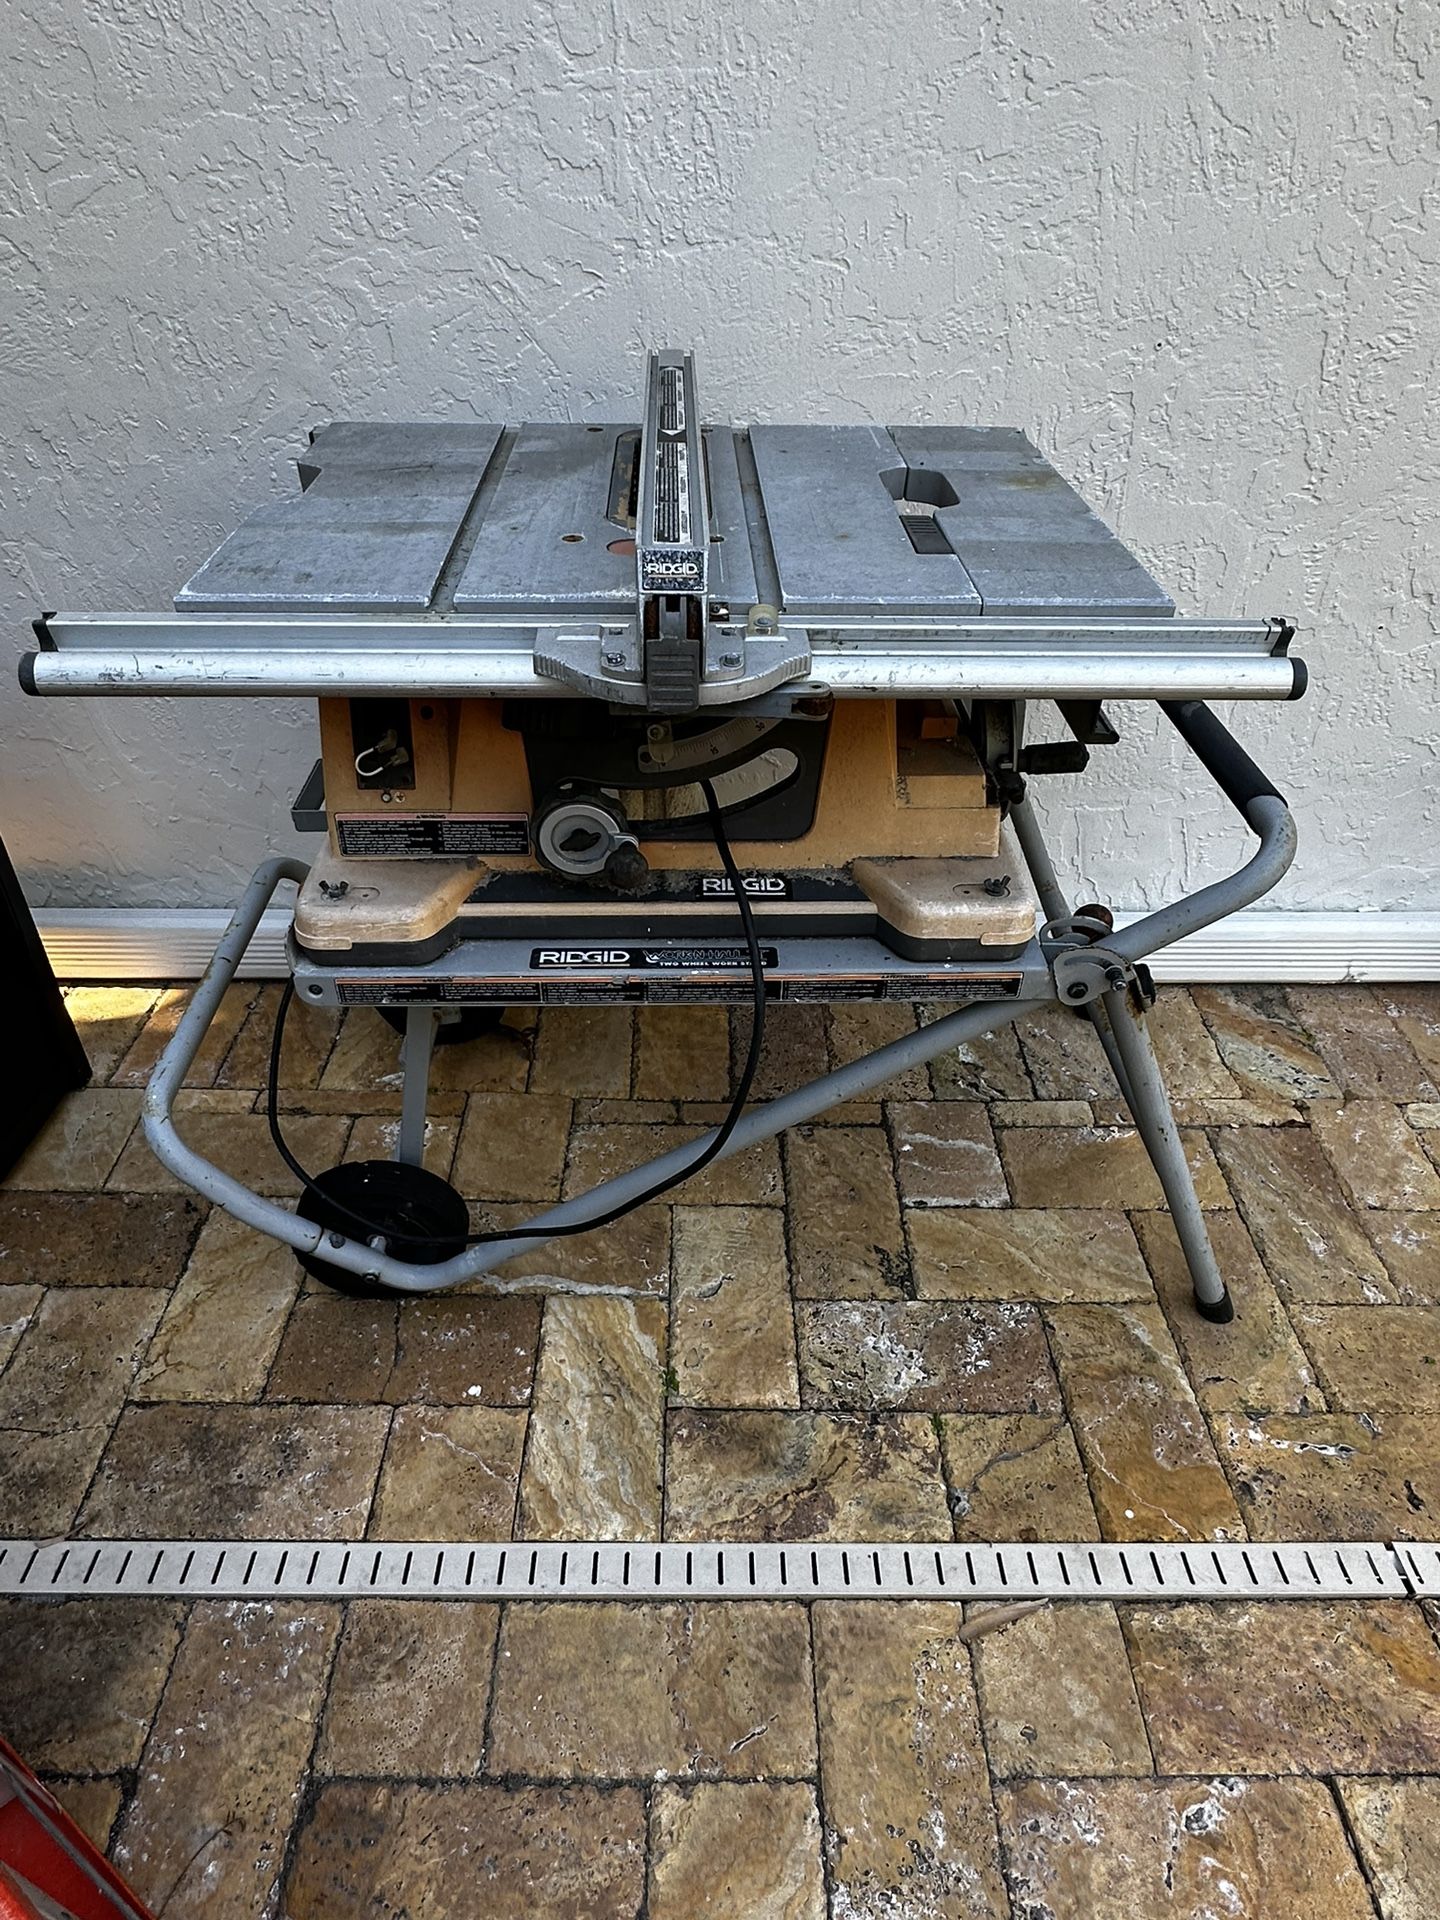 RIDGID Table Saw With Stand